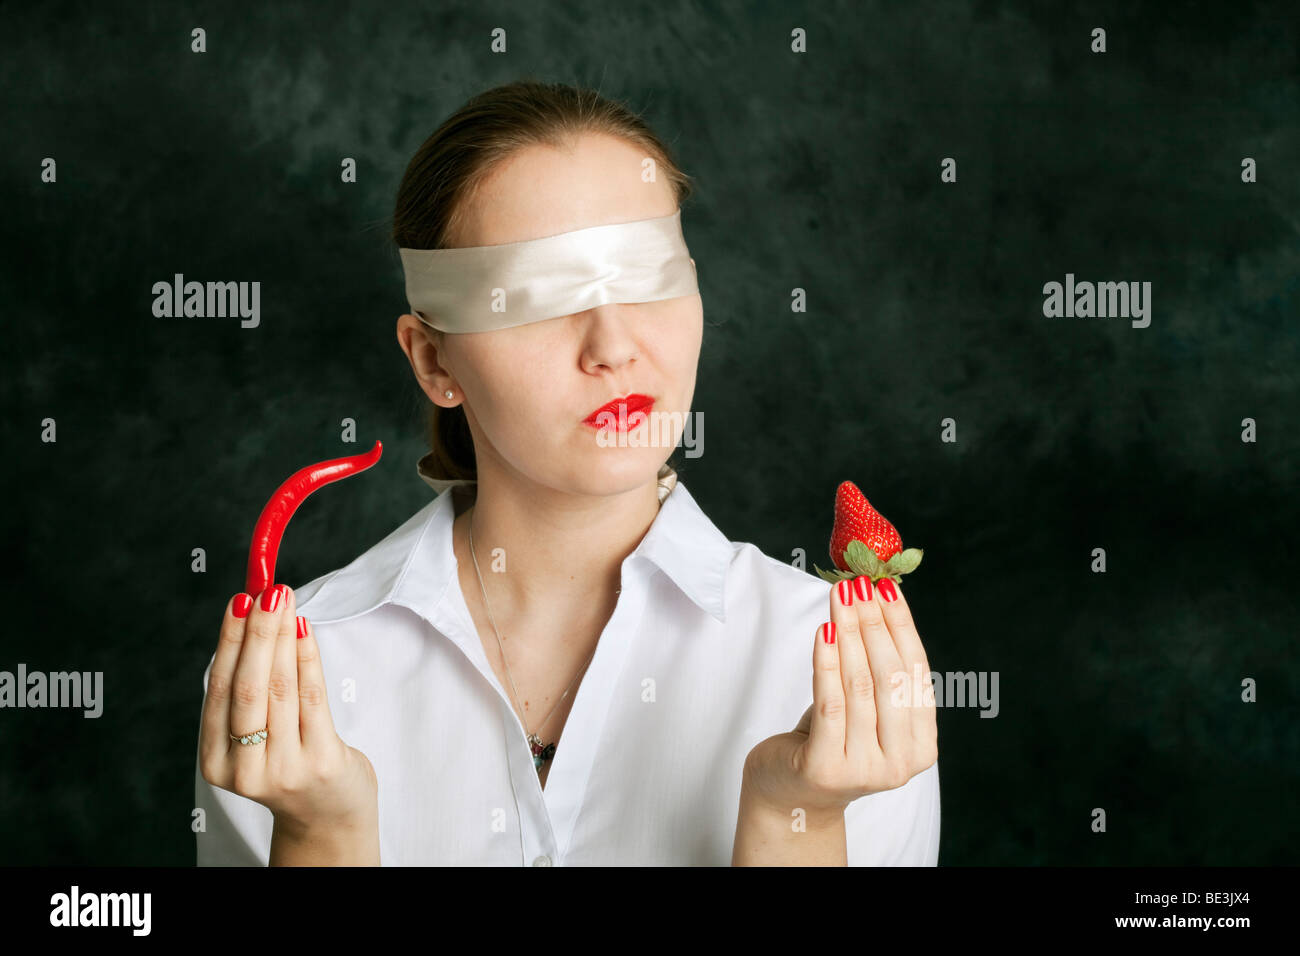 Woman blindfolded holding a chilli and a strawberry Stock Photo